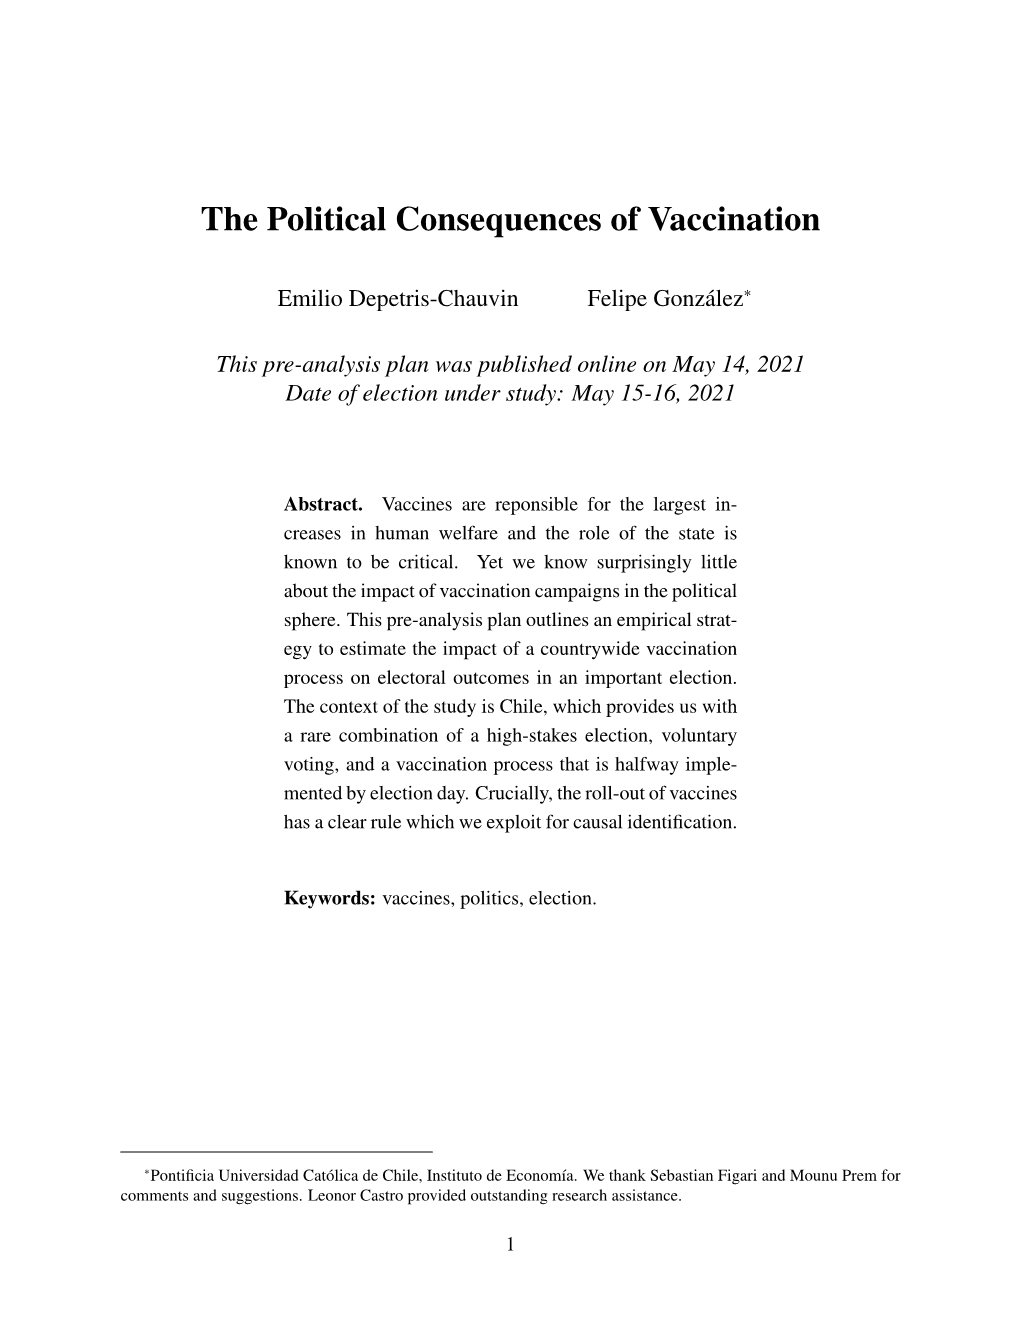 The Political Consequences of Vaccination